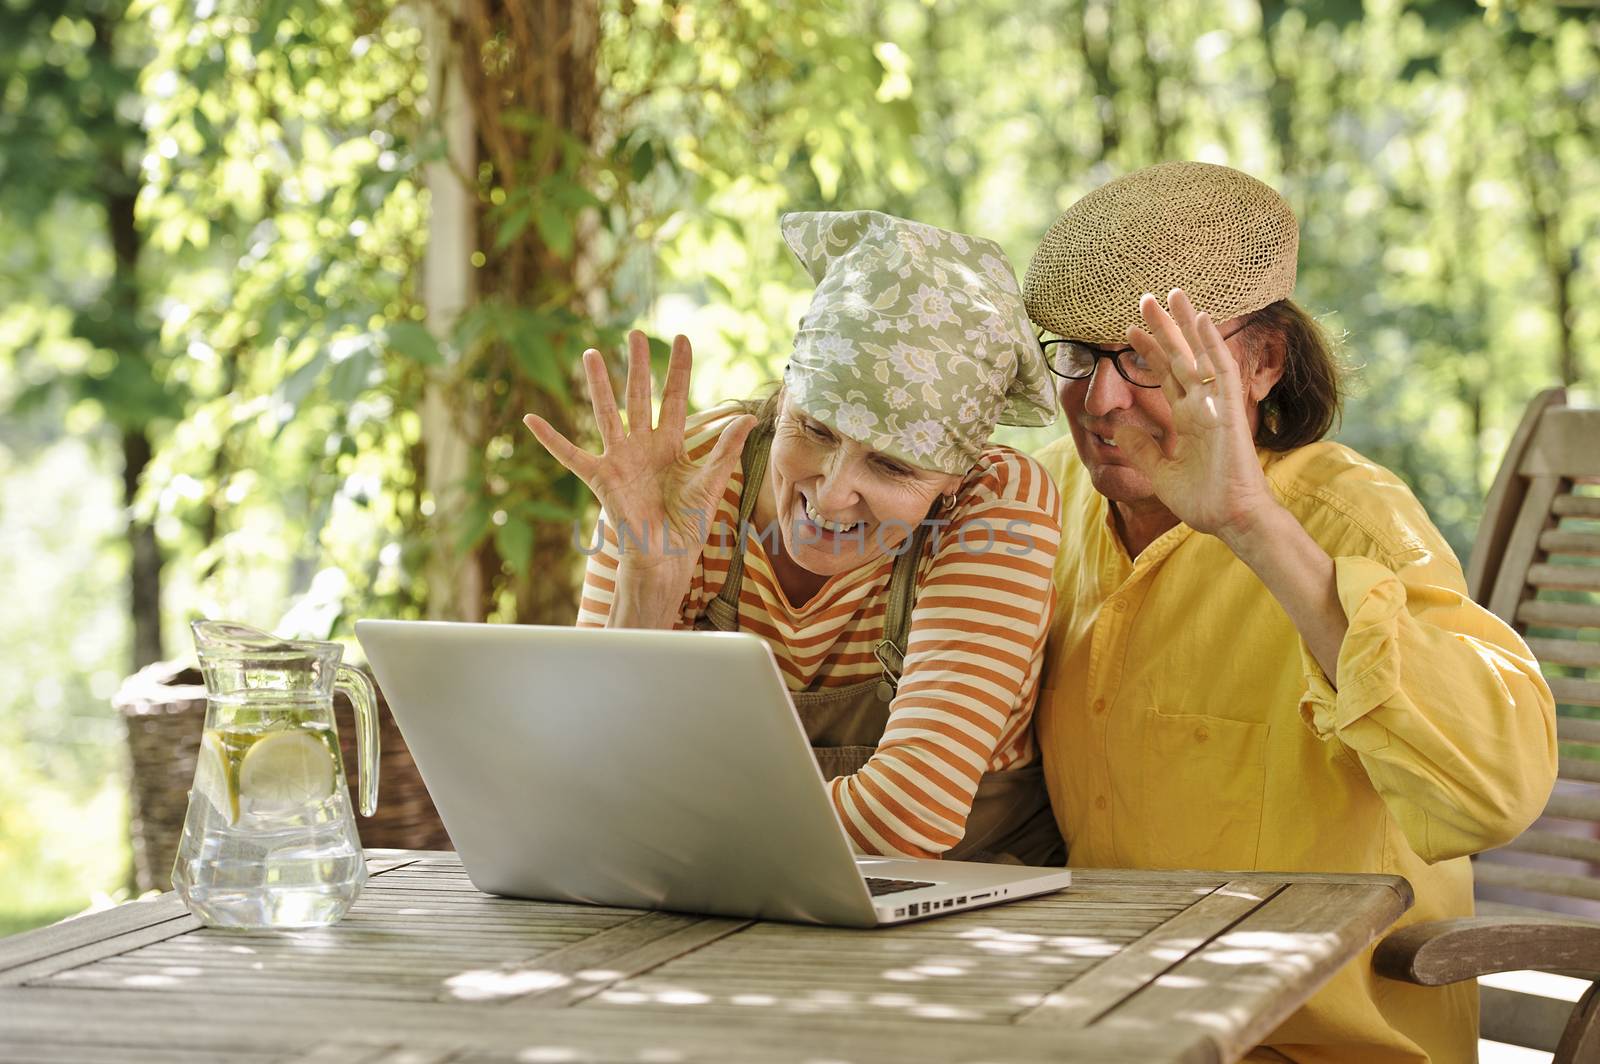 Senior couple outdoors with a laptop, They're looking at the computer. Possibly having a wireless video call with grandchildren. There's a sunny background of trees and bushes